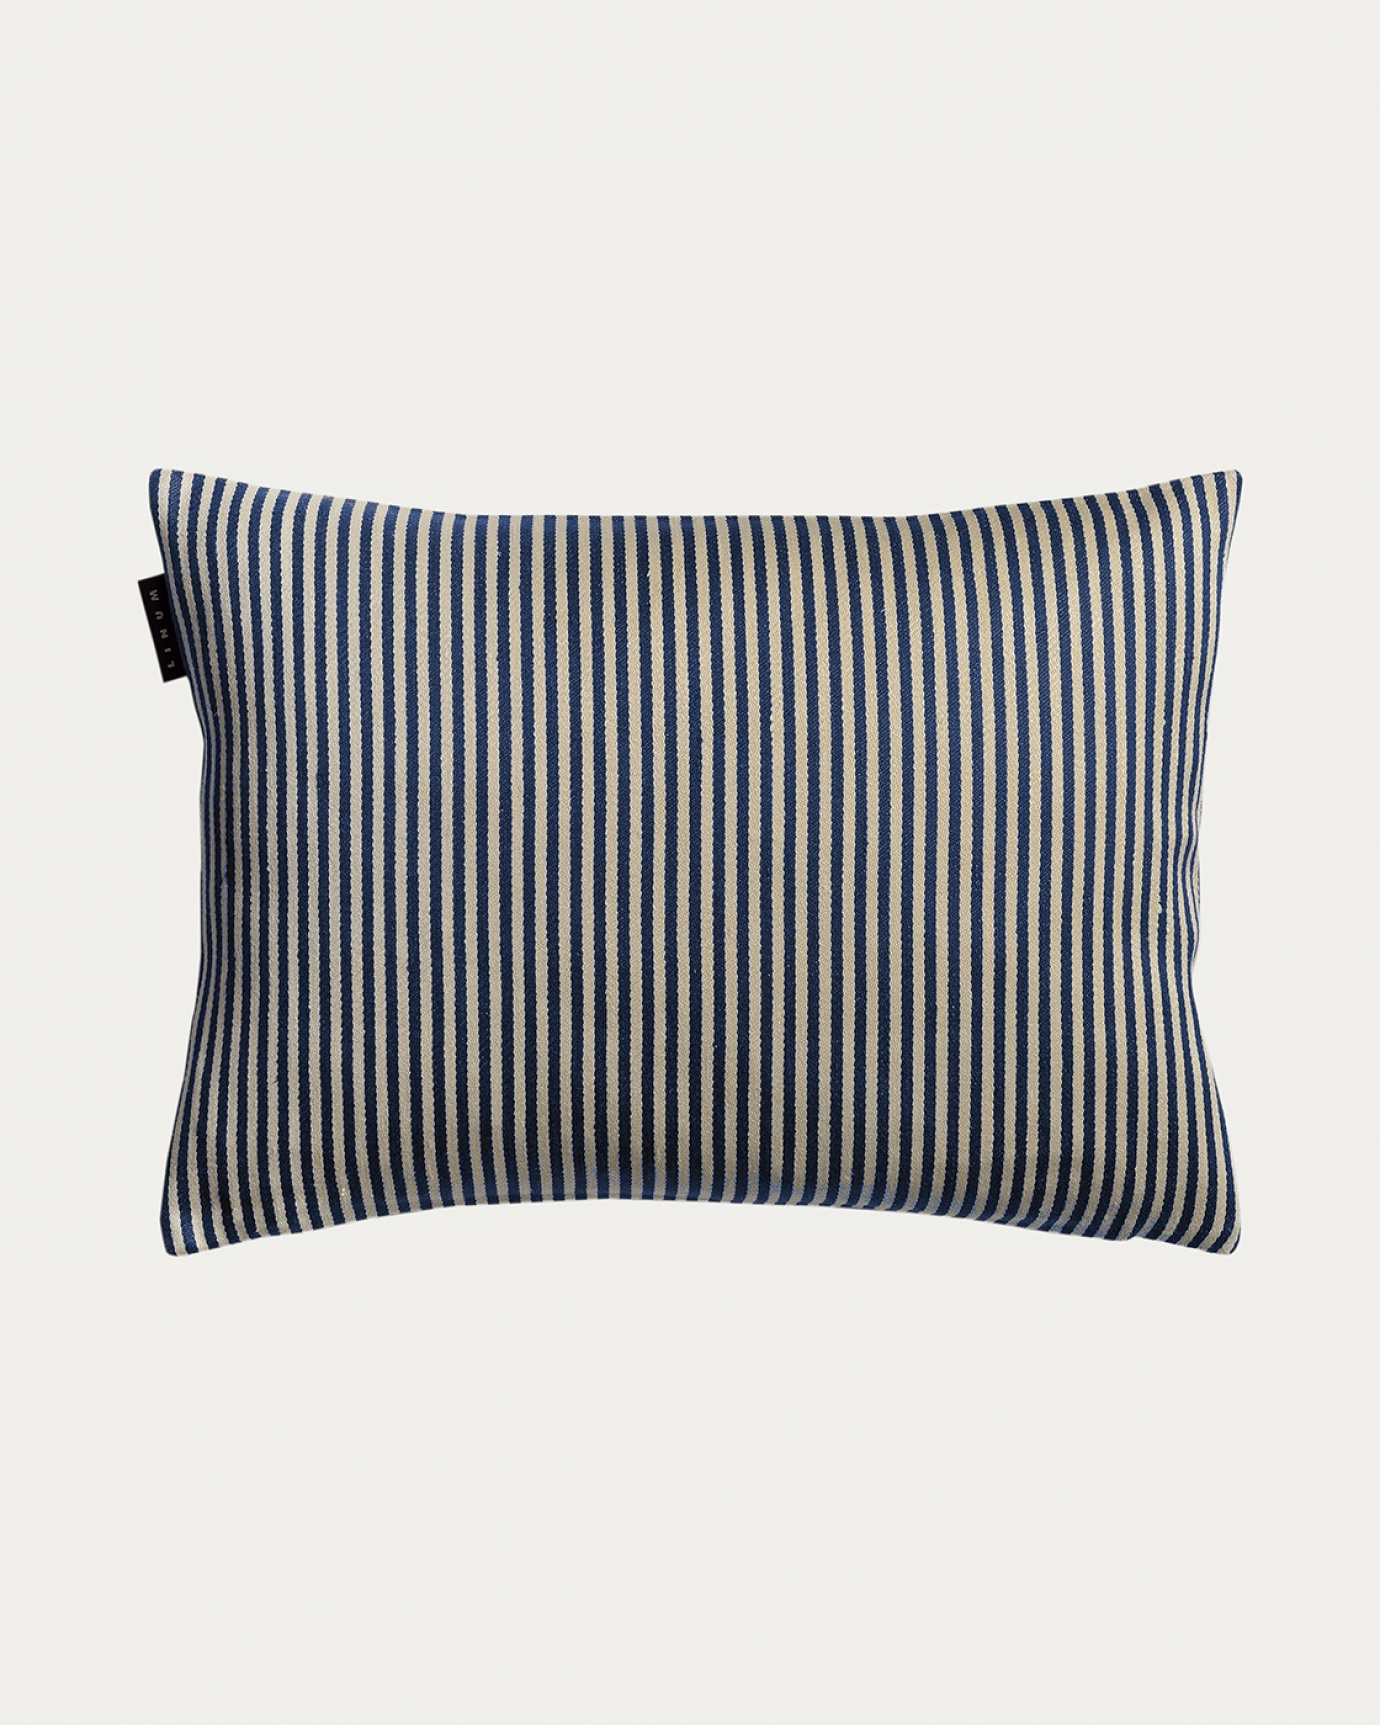 Product image ink blue CALCIO cushion cover with thin stripes of 77% linen and 23% cotton from LINUM DESIGN. Size 35x50 cm.